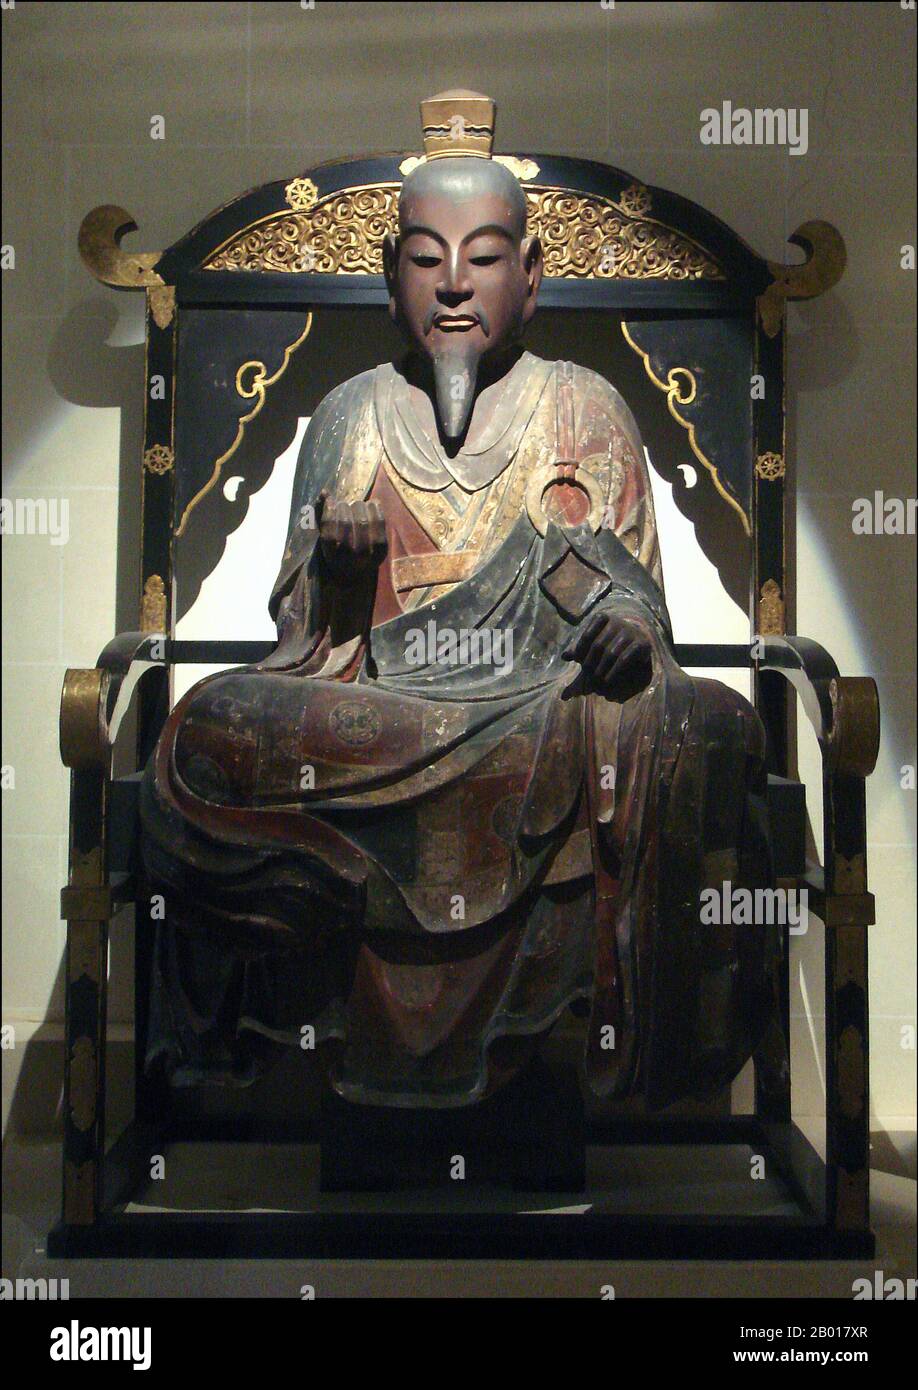 Japan: Prince Shotoku (7 February 574 - 8 April 622). Statue in the Musee Guimet, photo by PHGCOM (CC BY-SA 3.0 License).  Prince Shotoku, also known as Prince Umayado, was a regent and a politician of the Asuka period in Japan. The son of Emperor Yomei, he was a member of the ruling Soga clan. Shotoku was appointed as regent (Sessho) in 593 by Empress Suiko, his aunt.  Shotoku, inspired by Buddhist teachings, succeeded in establishing a centralised government during his reign. In 603, he established the 12 official court ranks, and was a massive promoter of Buddhism throughout the nation. Stock Photo